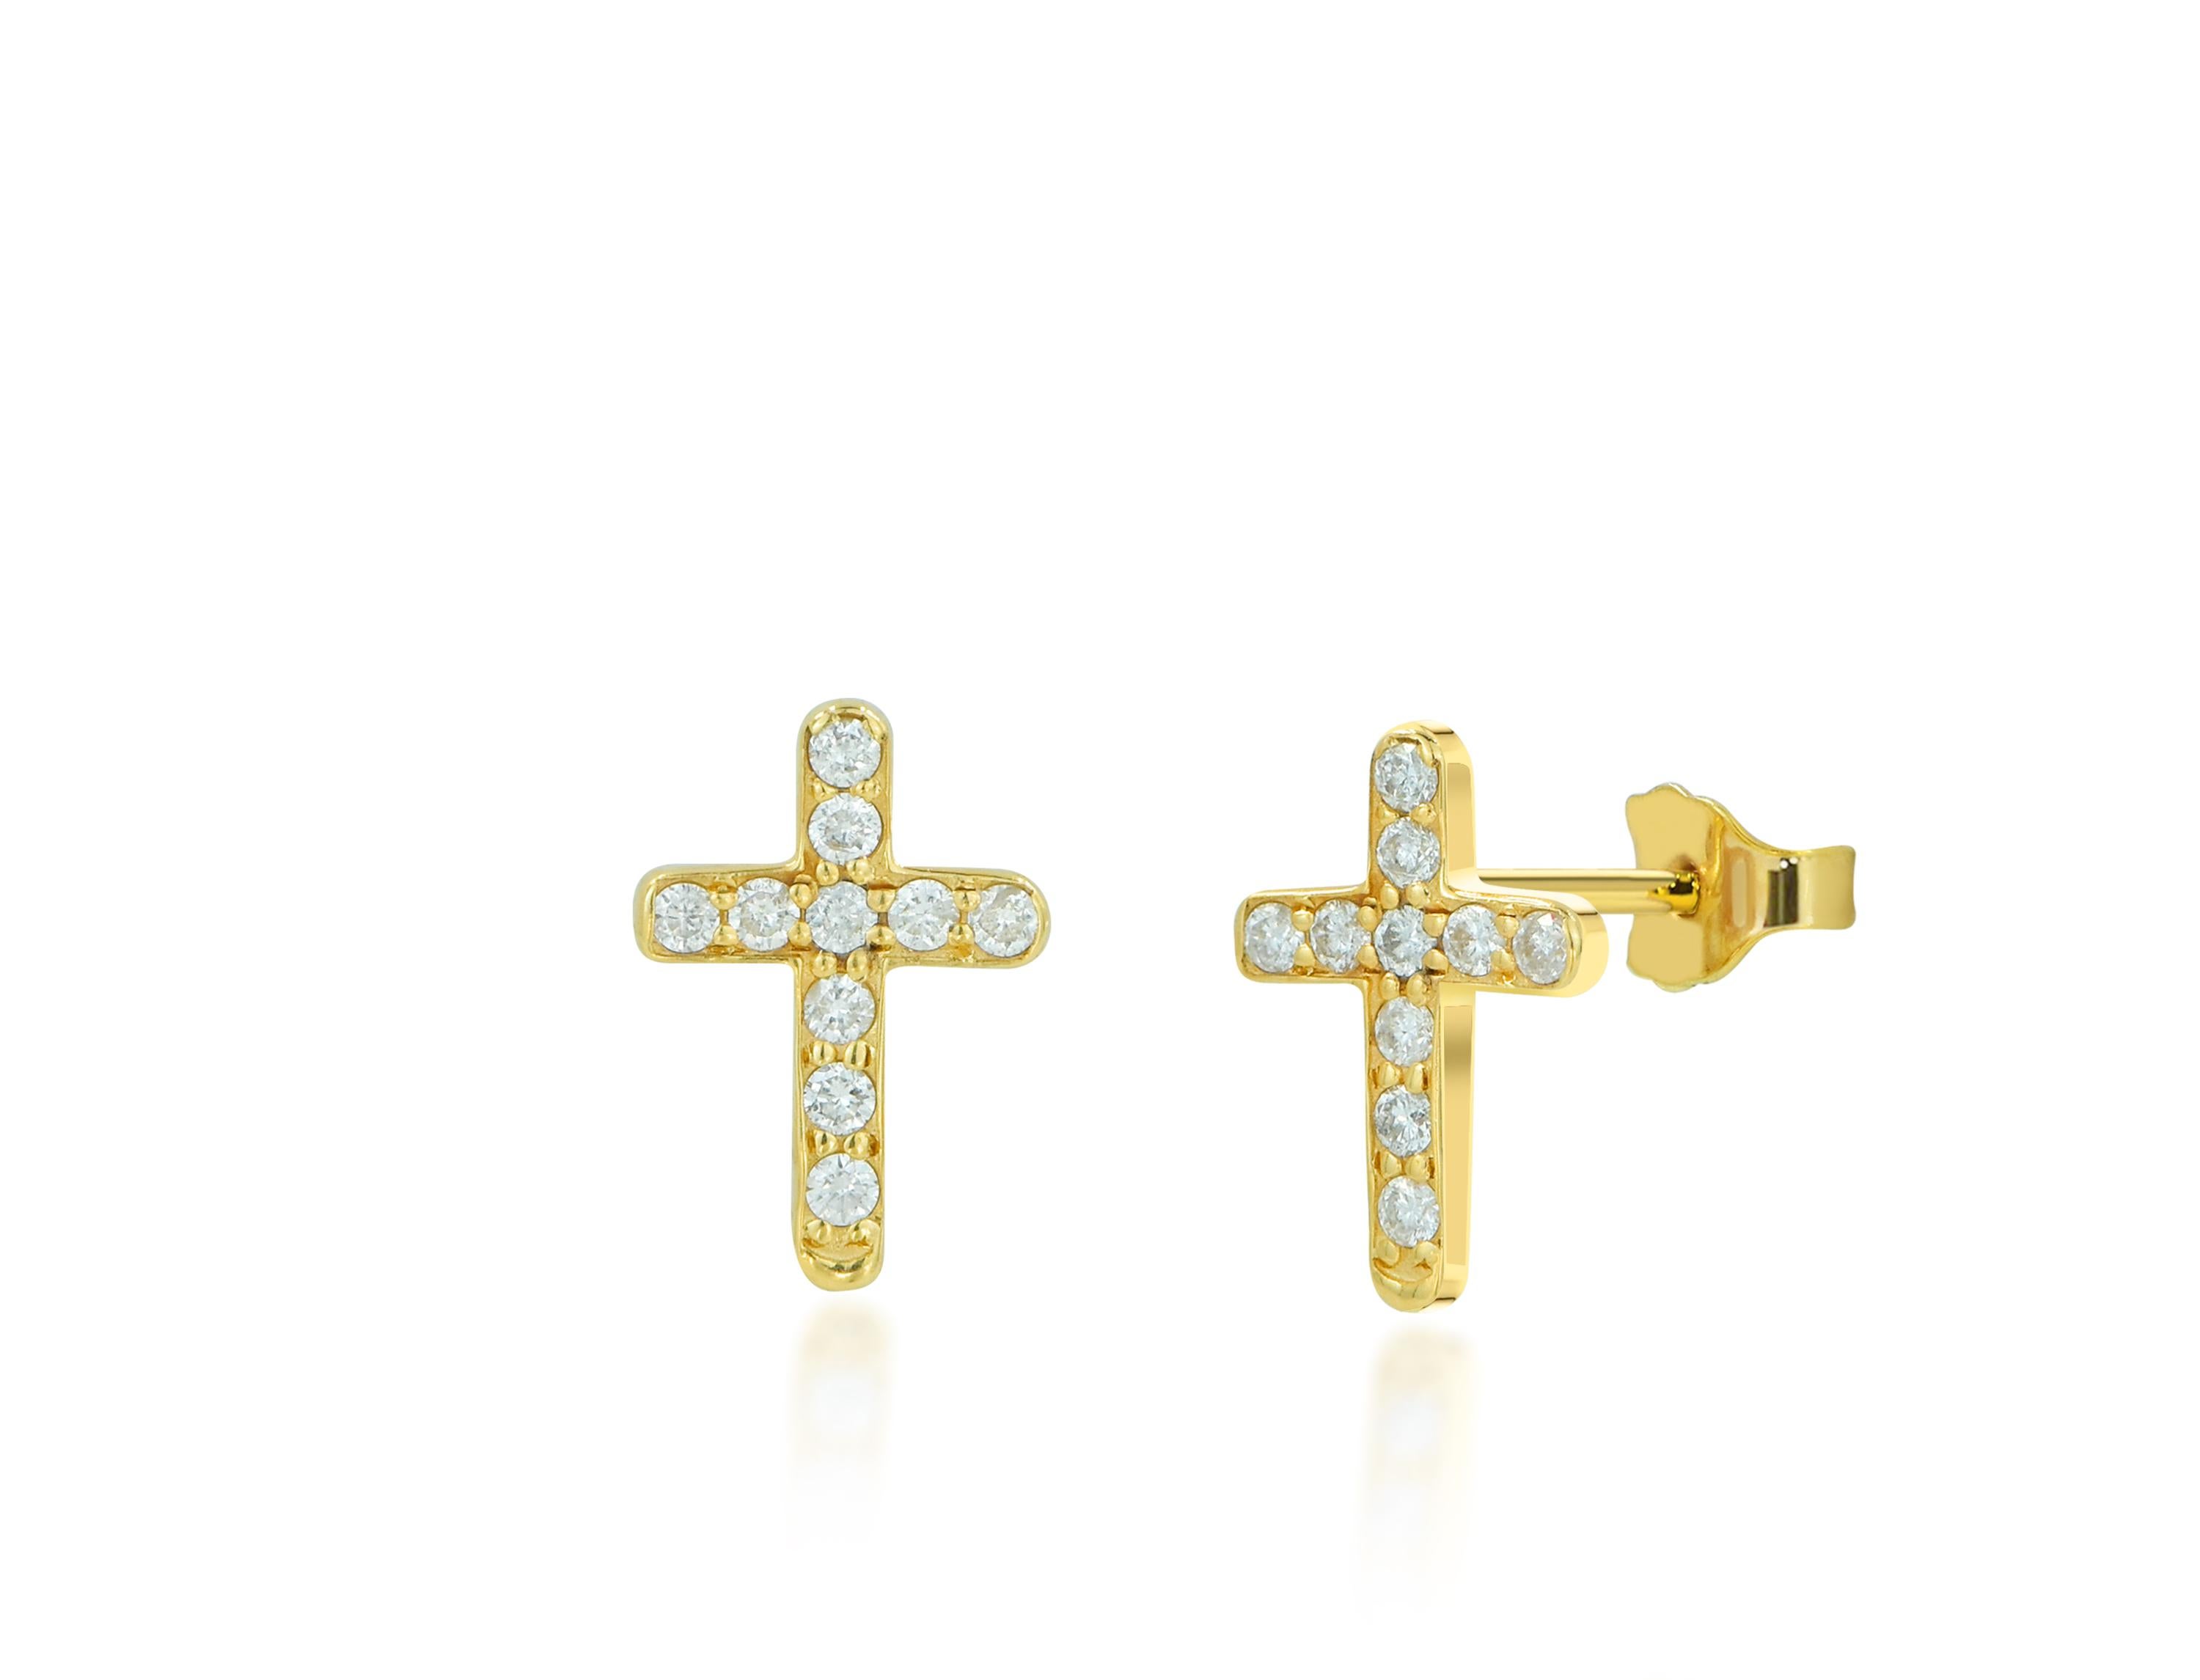 Diamond Cross Stud Earrings in 14k Rose Gold, Yellow Gold, White Gold.

These Dainty Stud Earrings are made of 14k solid gold featuring shiny brilliant round cut natural diamonds set by master setter in our studio. Simple but unique, elegant and